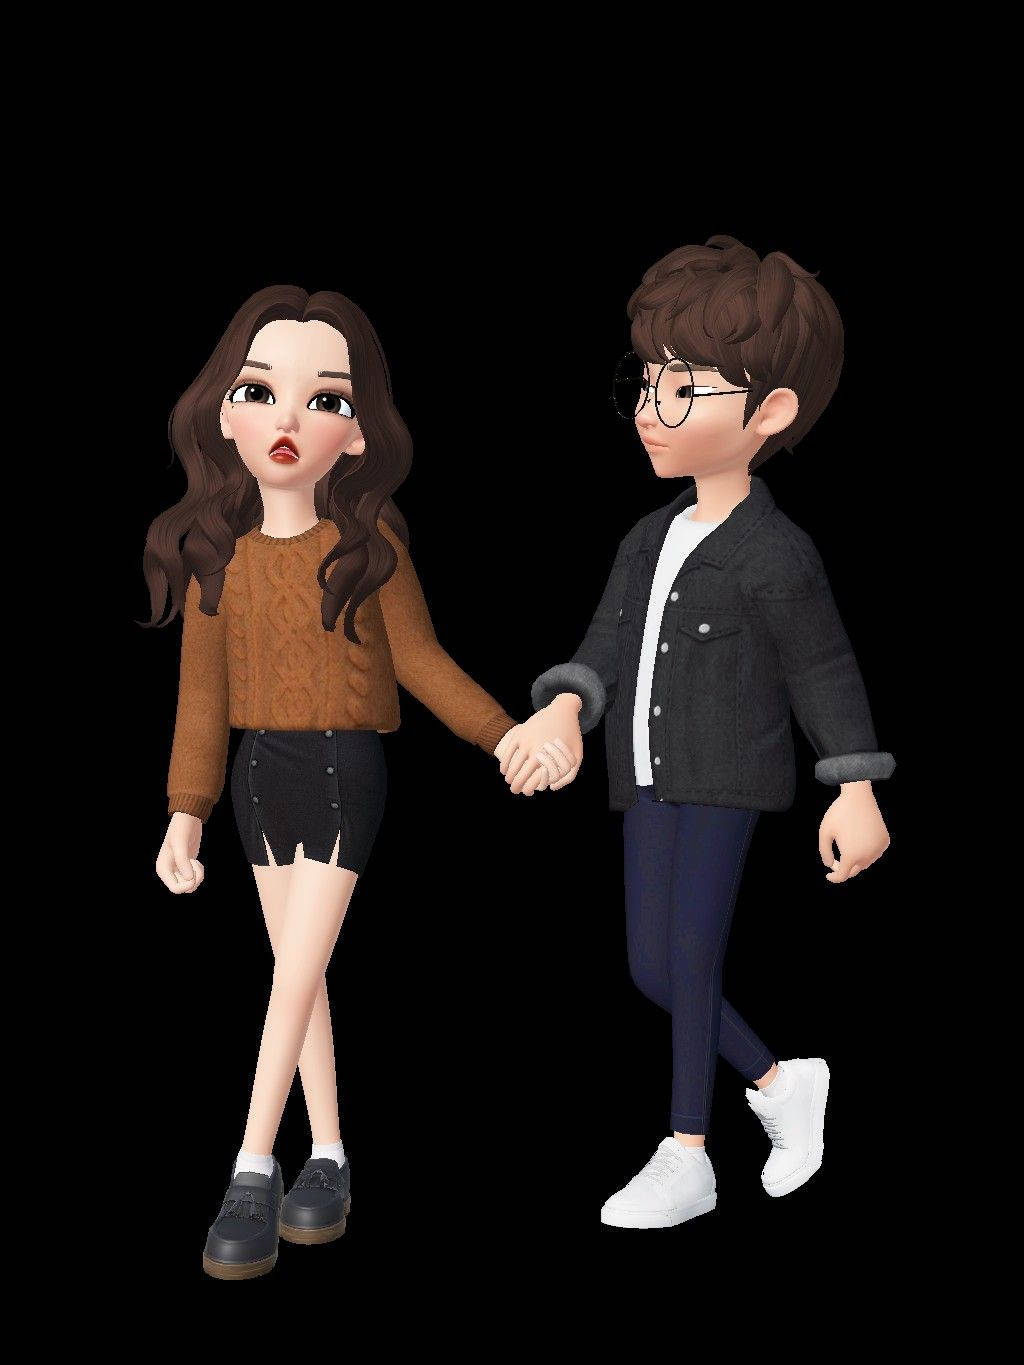 Adorable Cartoon Boy In Zepeto Couple Holding Hands Background